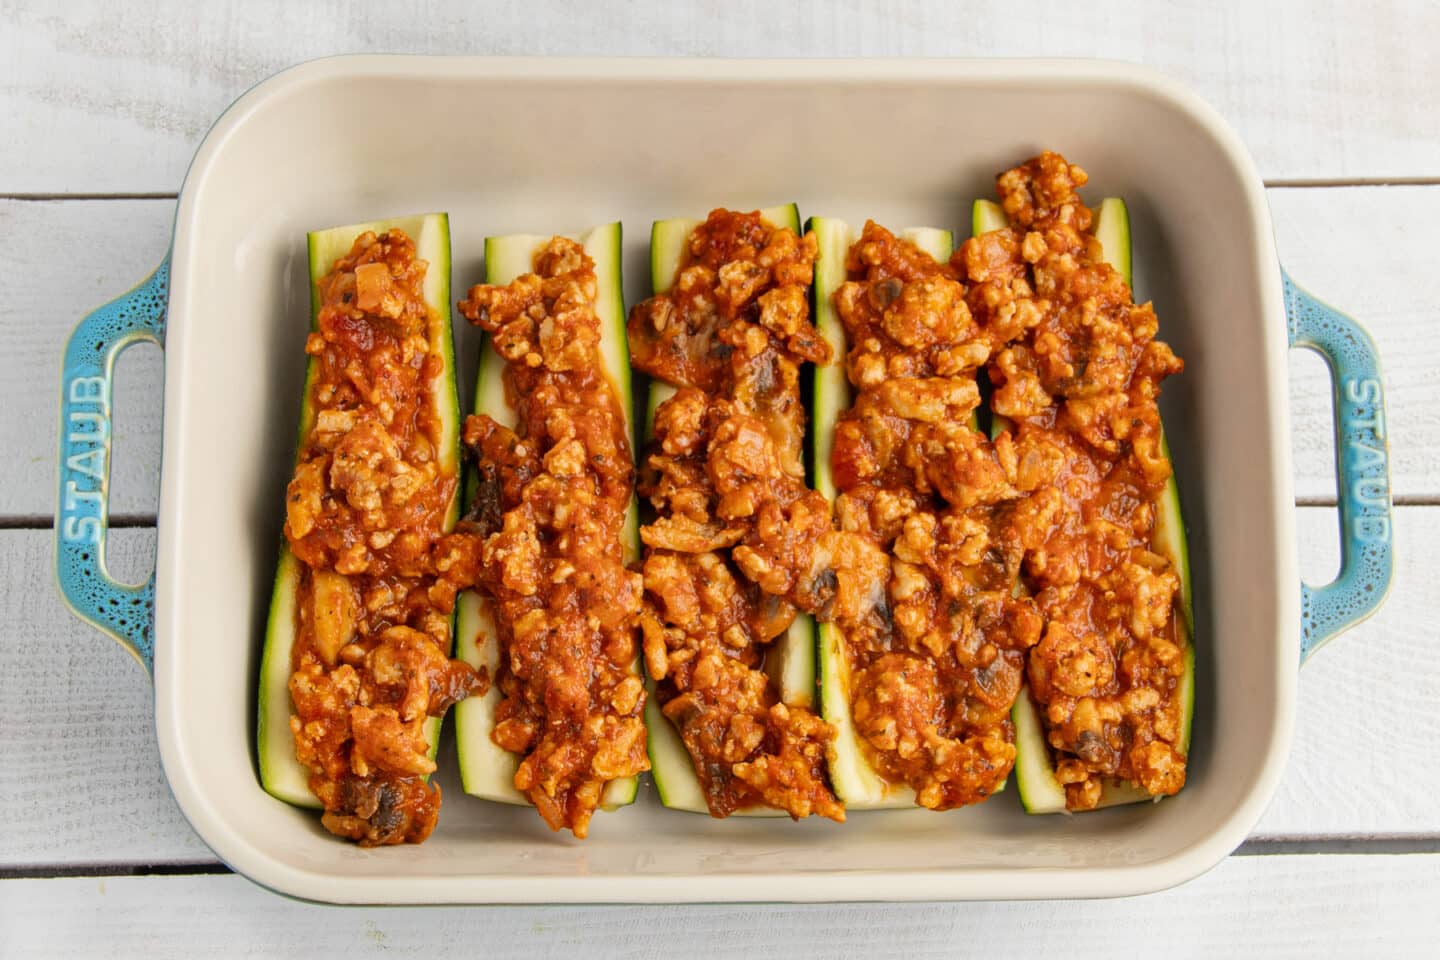 Picture of zucchini boats filled with chicken mixture.